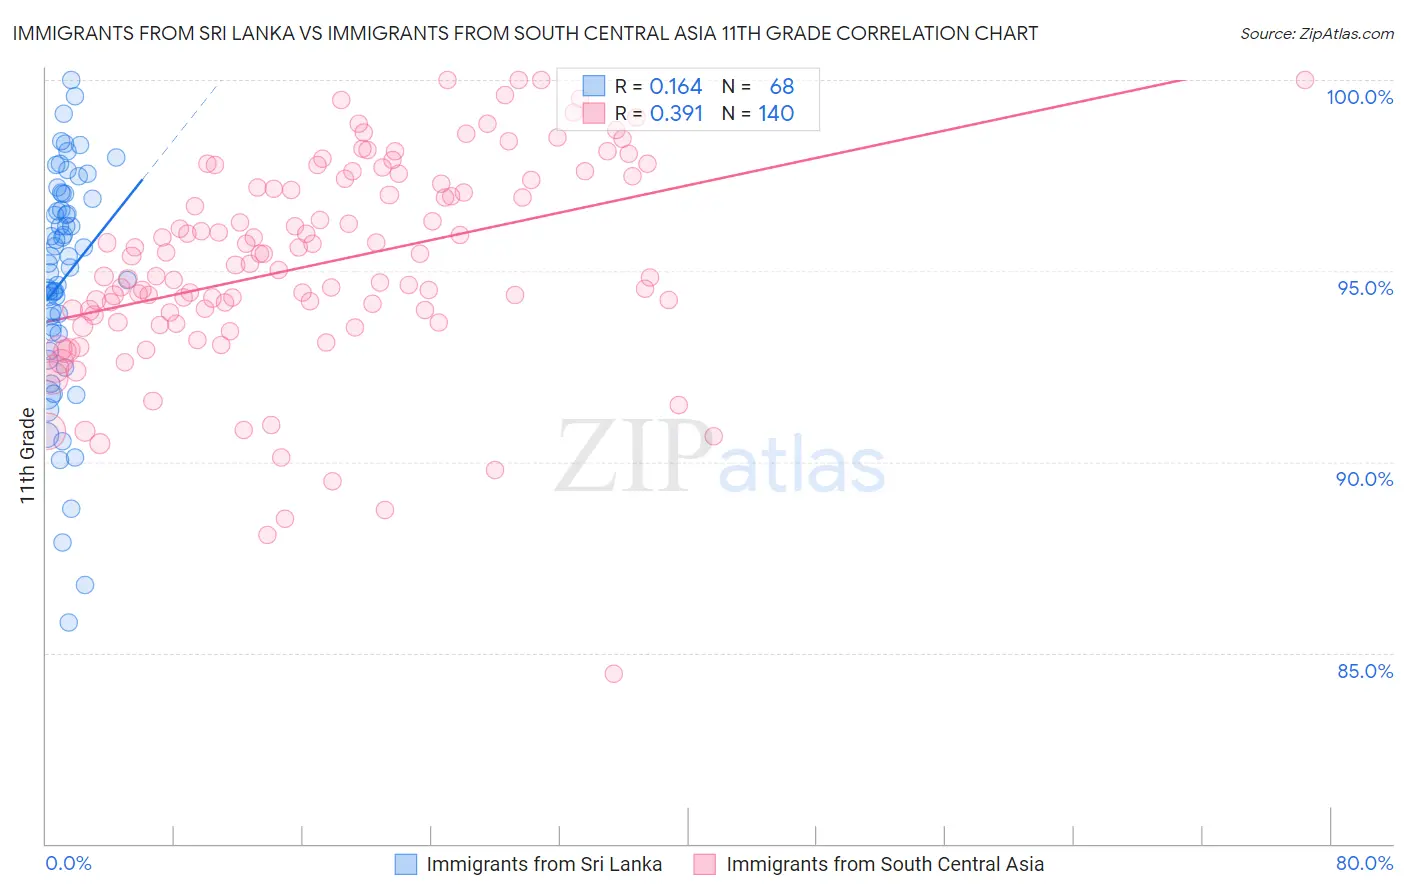 Immigrants from Sri Lanka vs Immigrants from South Central Asia 11th Grade